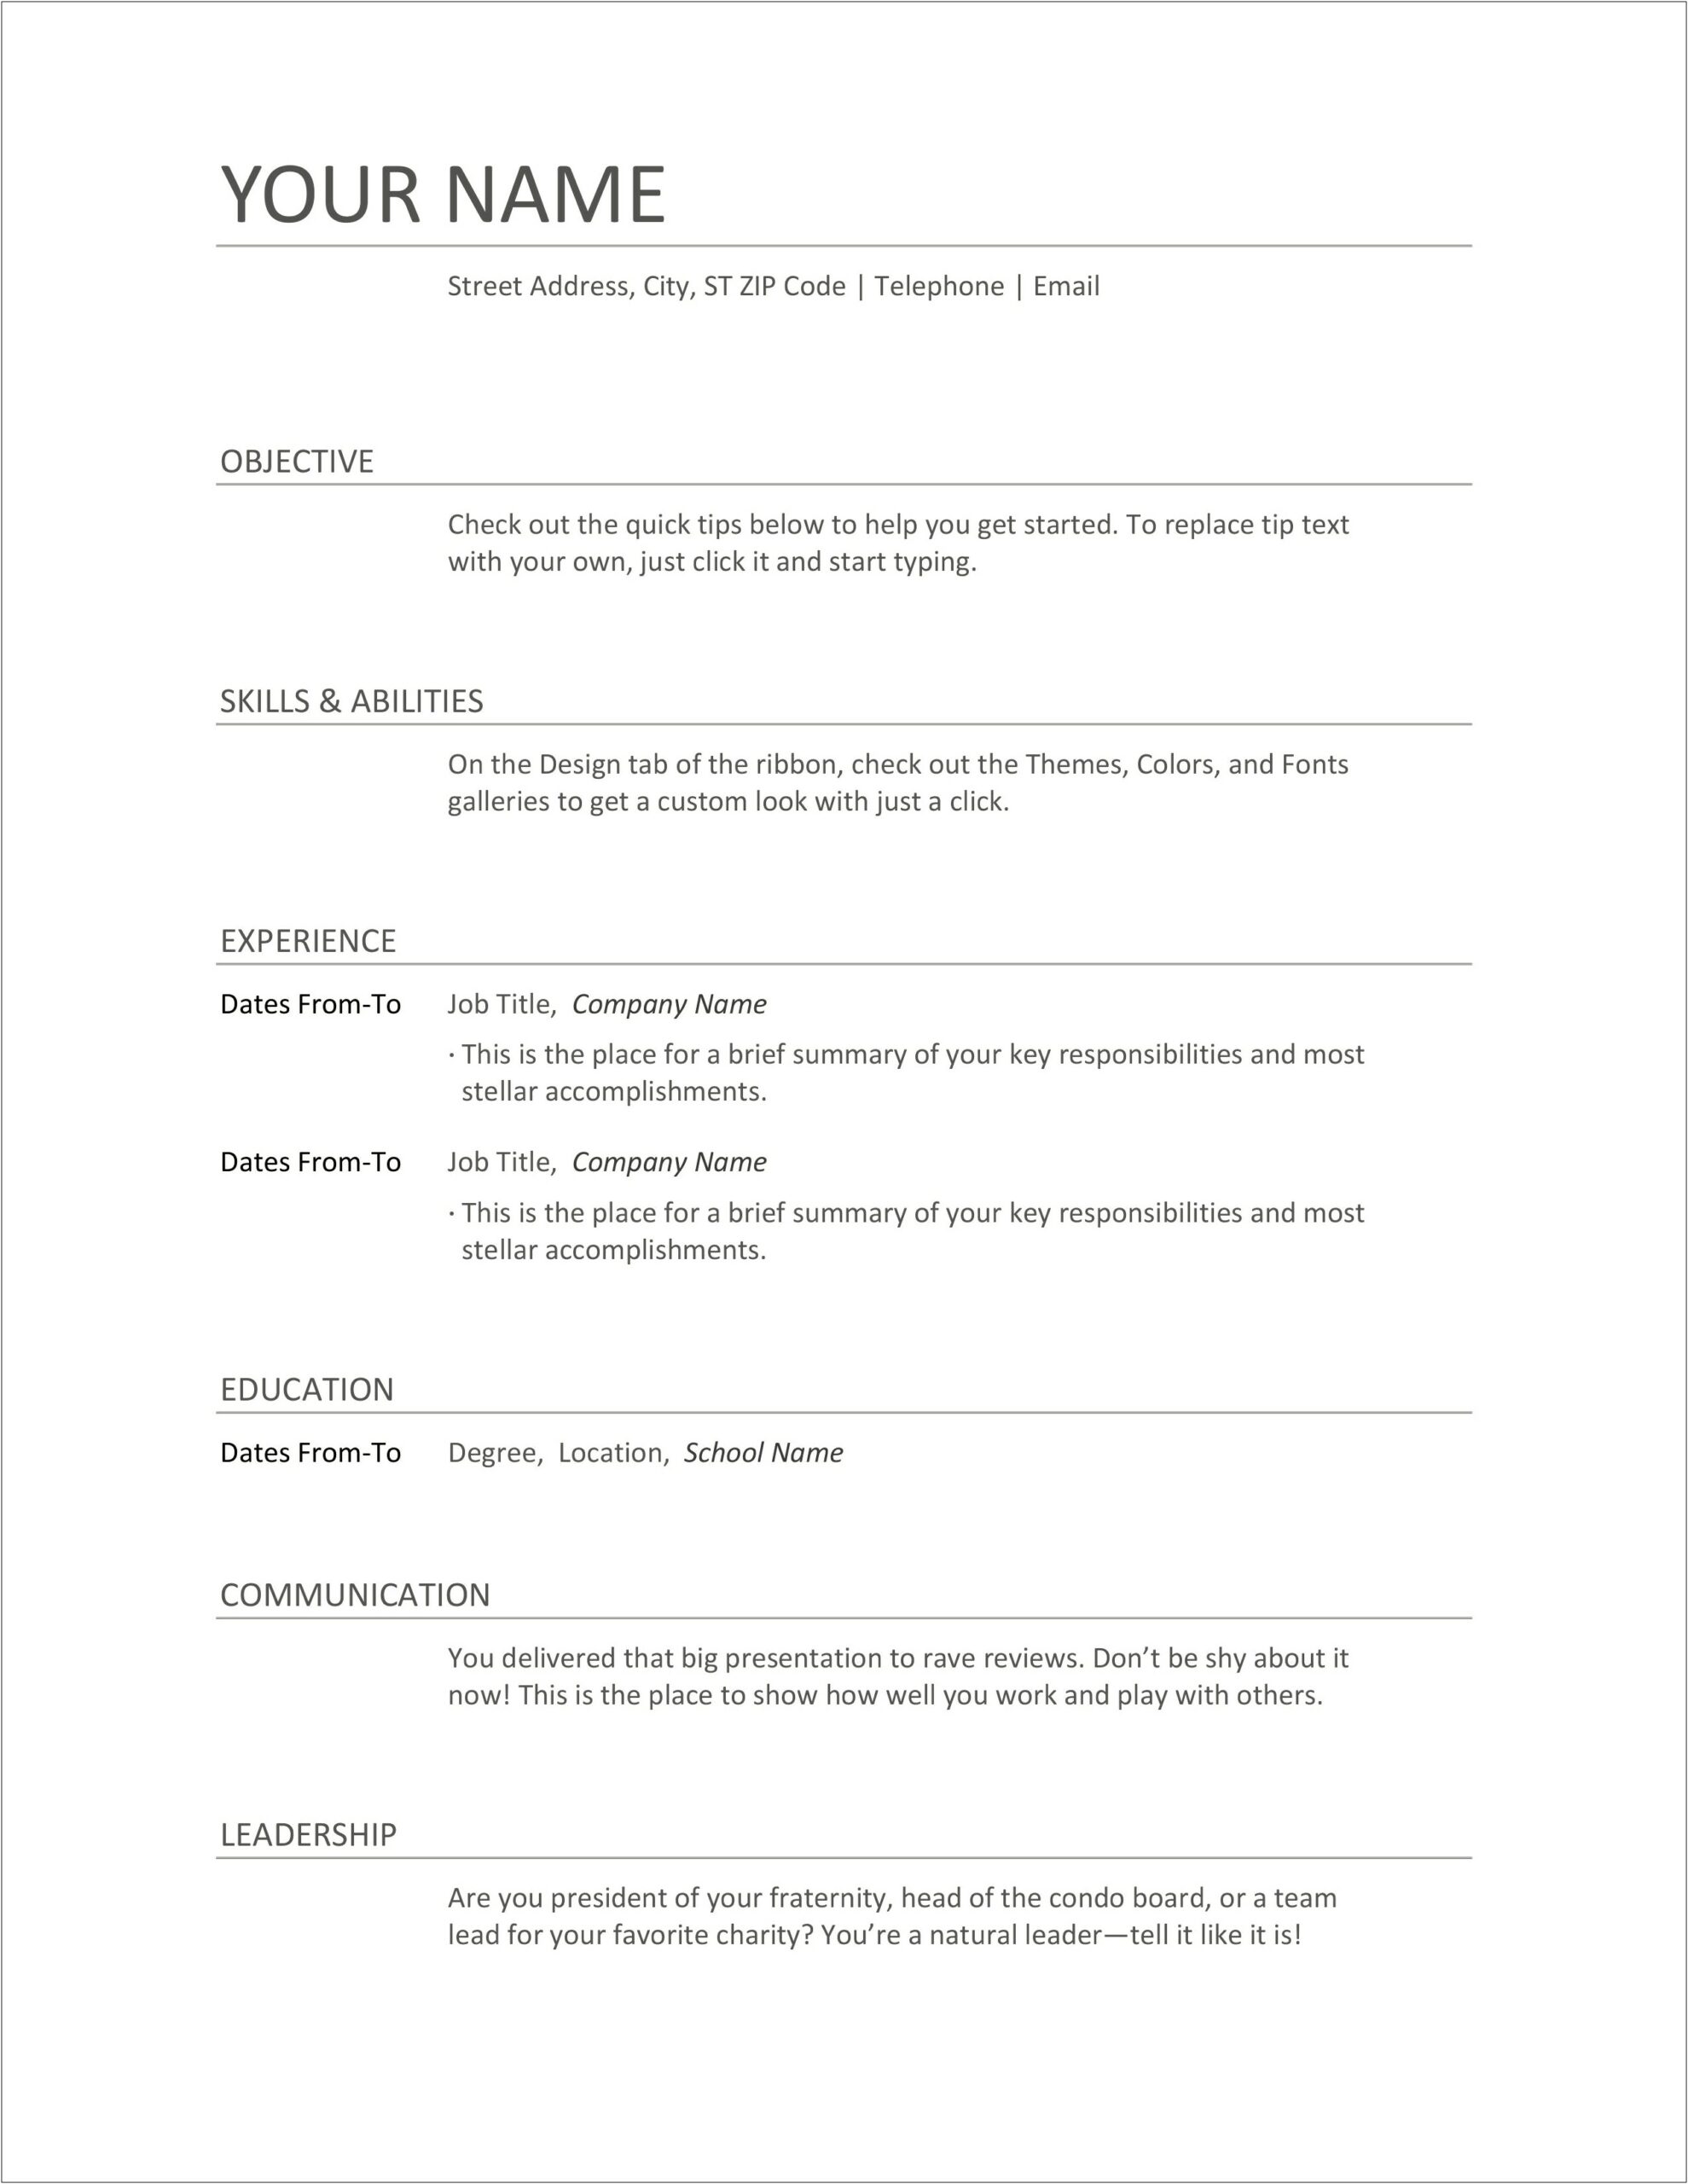 Resume Tips For Variety Of Jobs